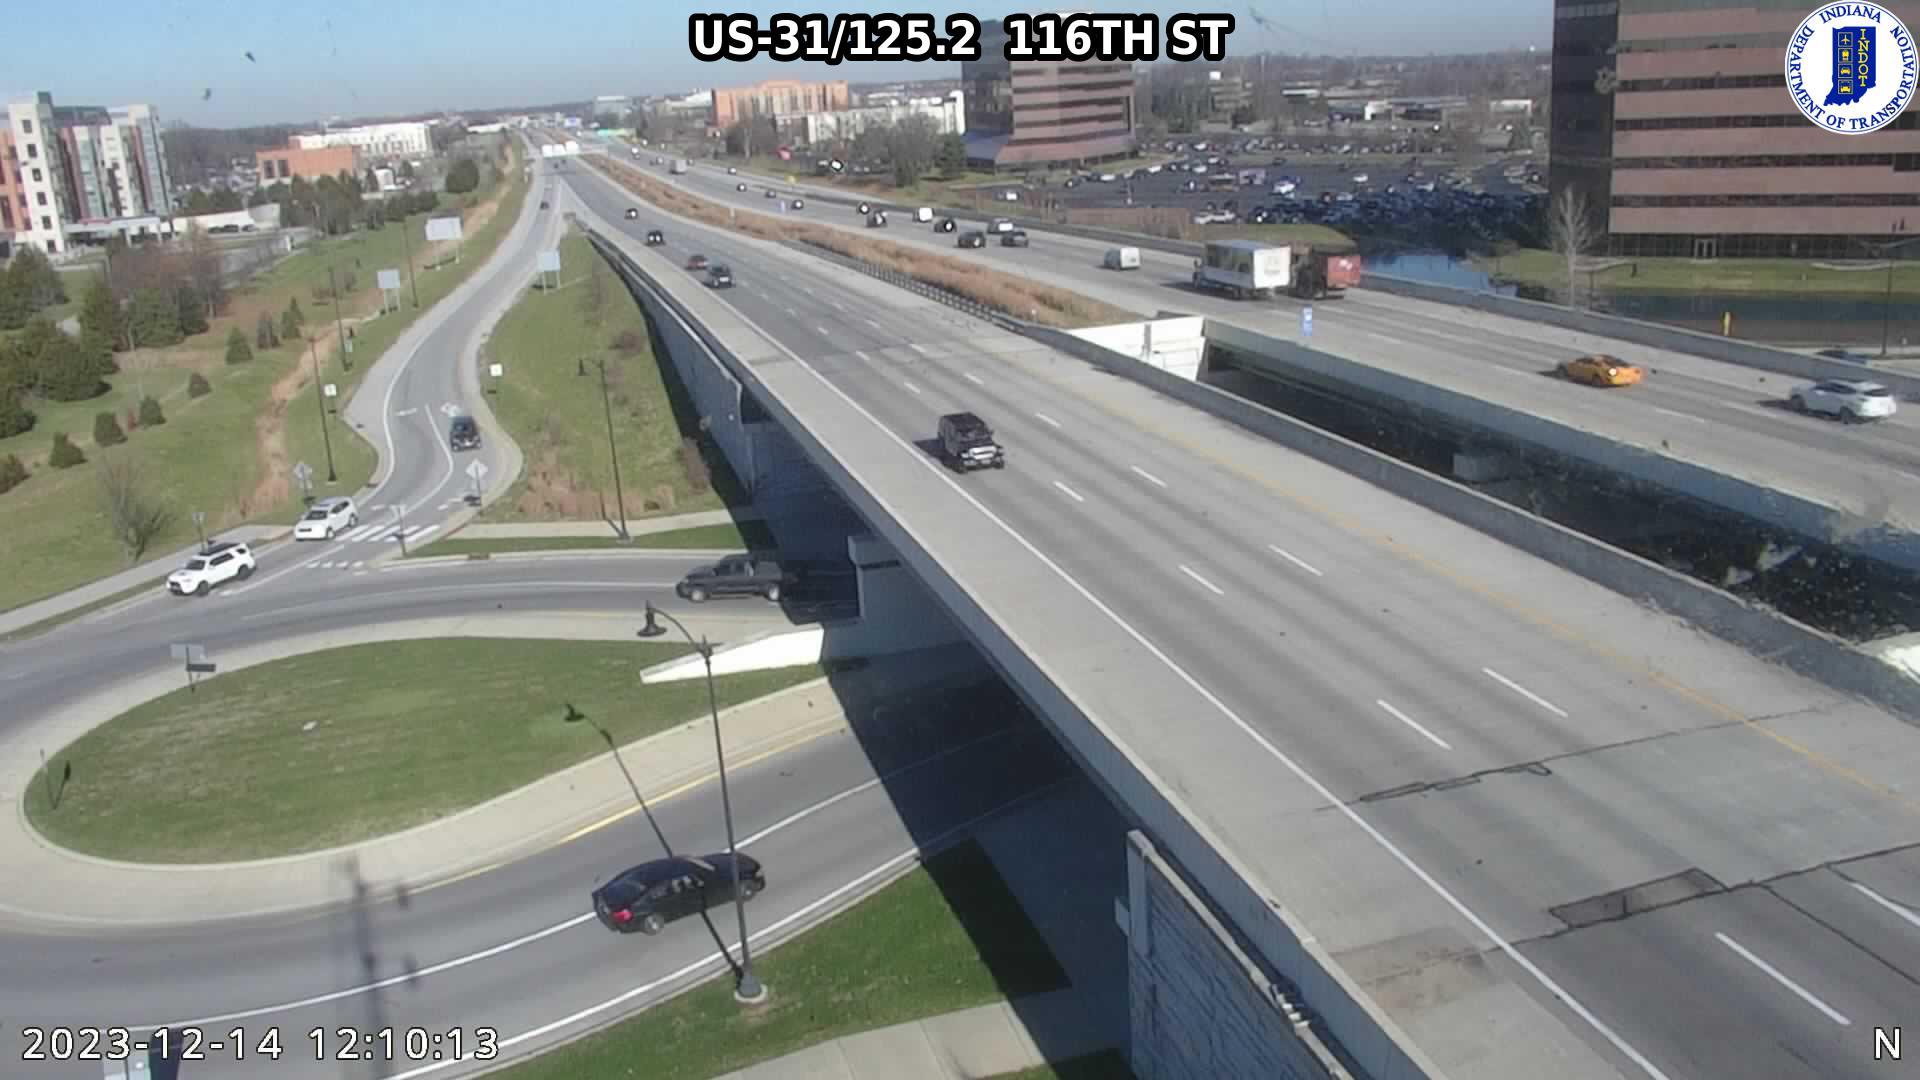 Traffic Cam Home Place: US-31: US-31/125.2 116TH ST : US-31/125.2 116TH ST Player